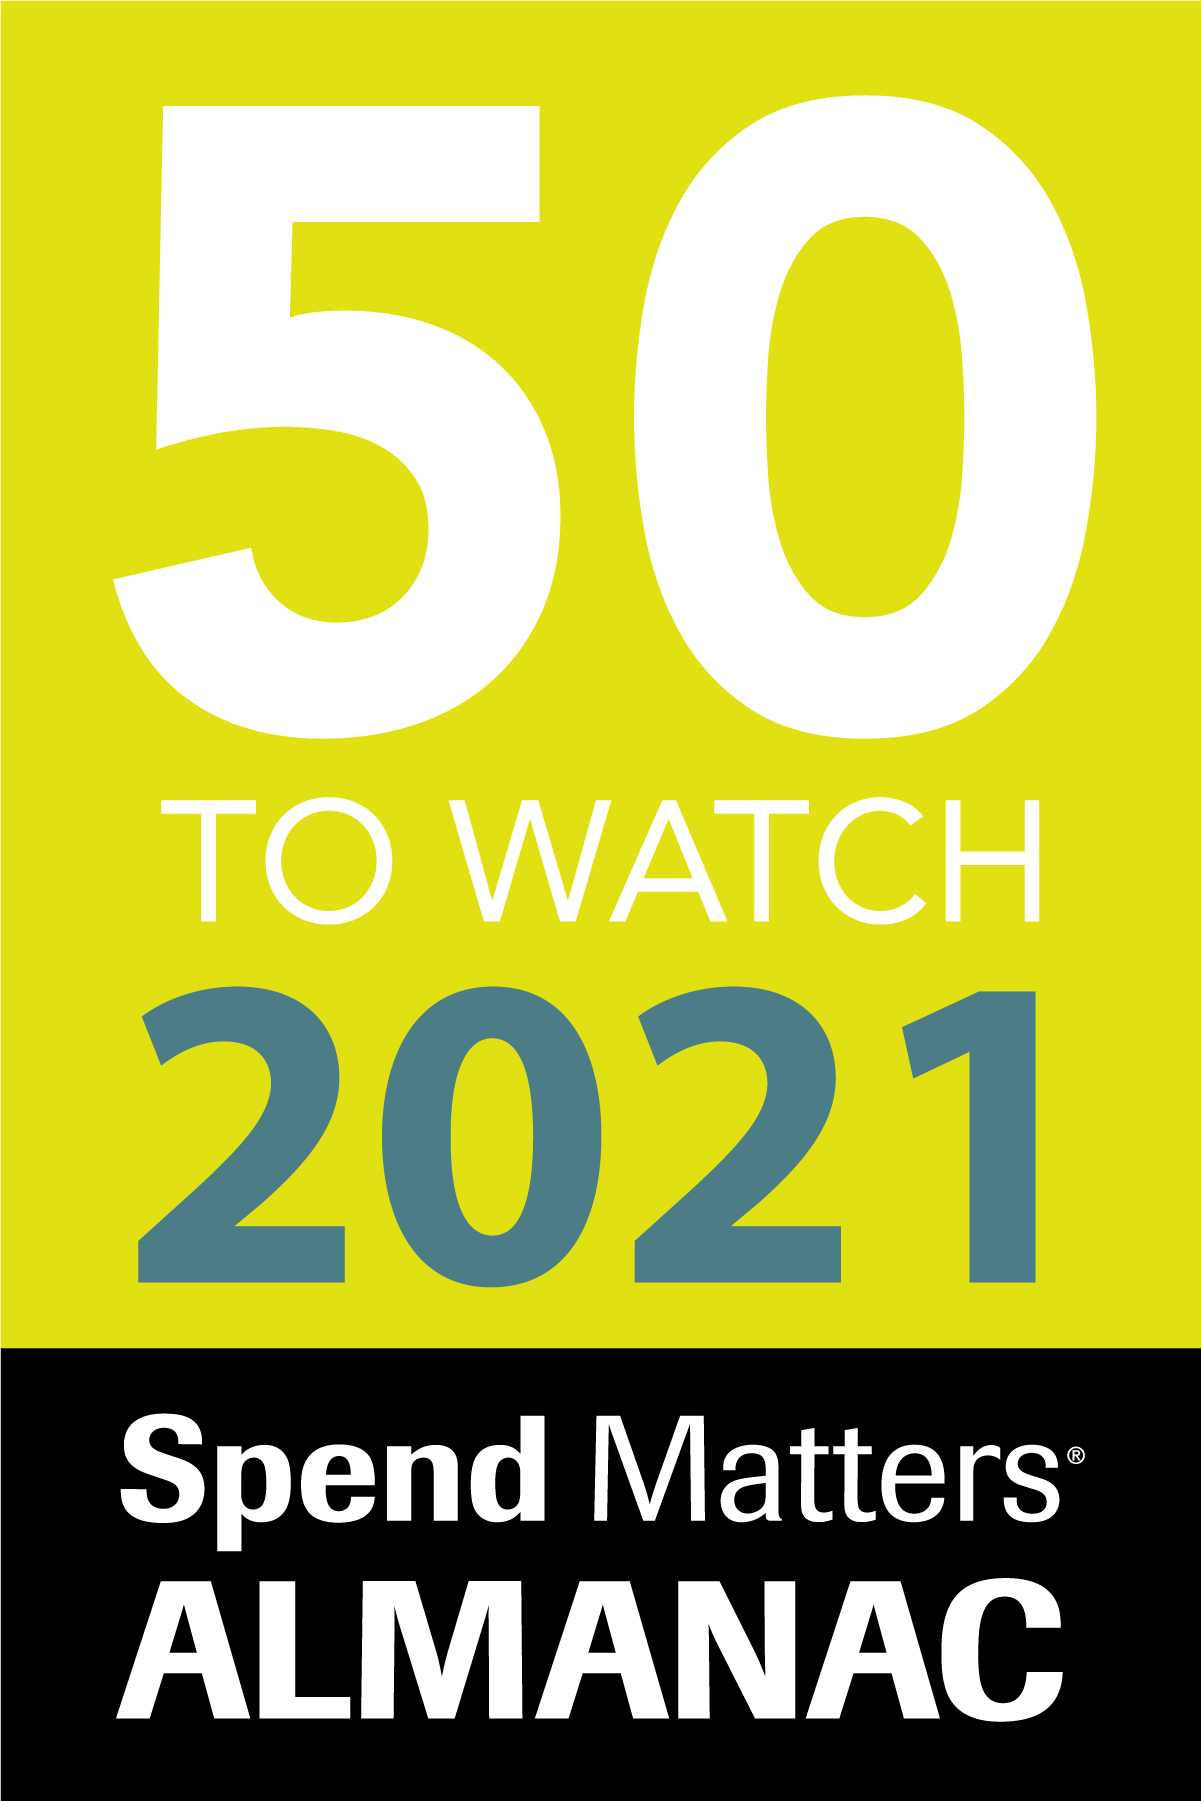 SpendMatters names Anaplan one of the “50 Procurement Software Tools to watch in 2021” for its capabilities related to Spend Analysis